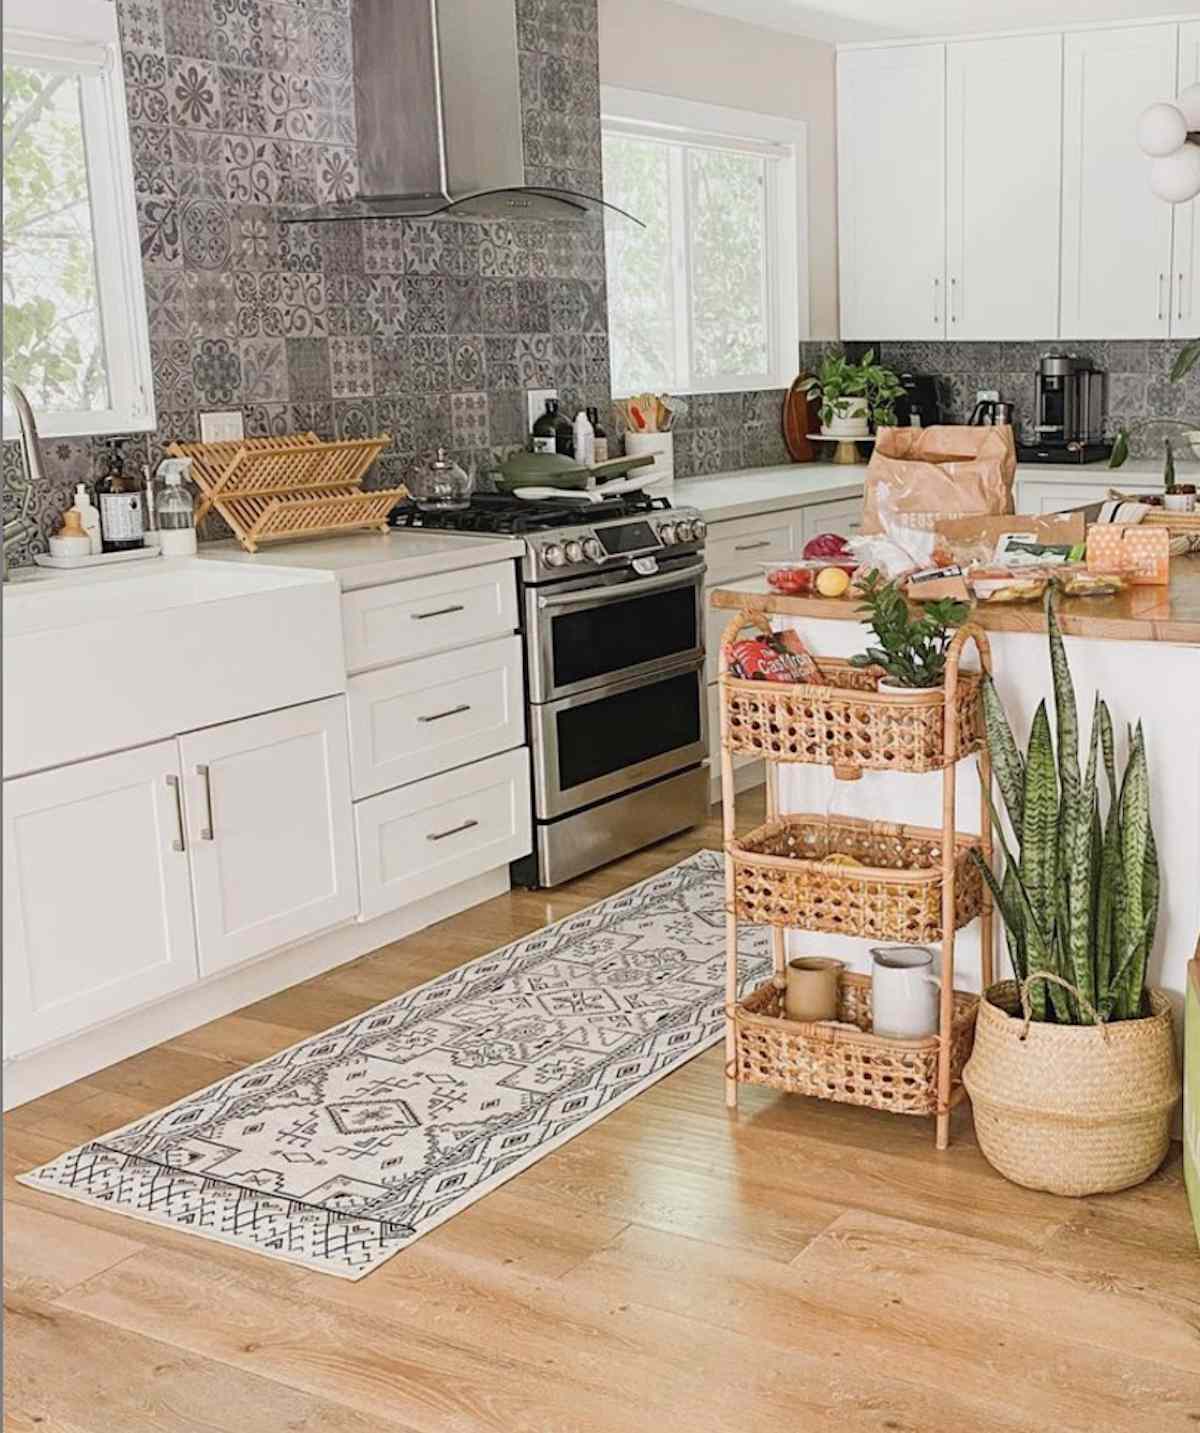 set of wicker baskets holding various kitchen items including cookbooks